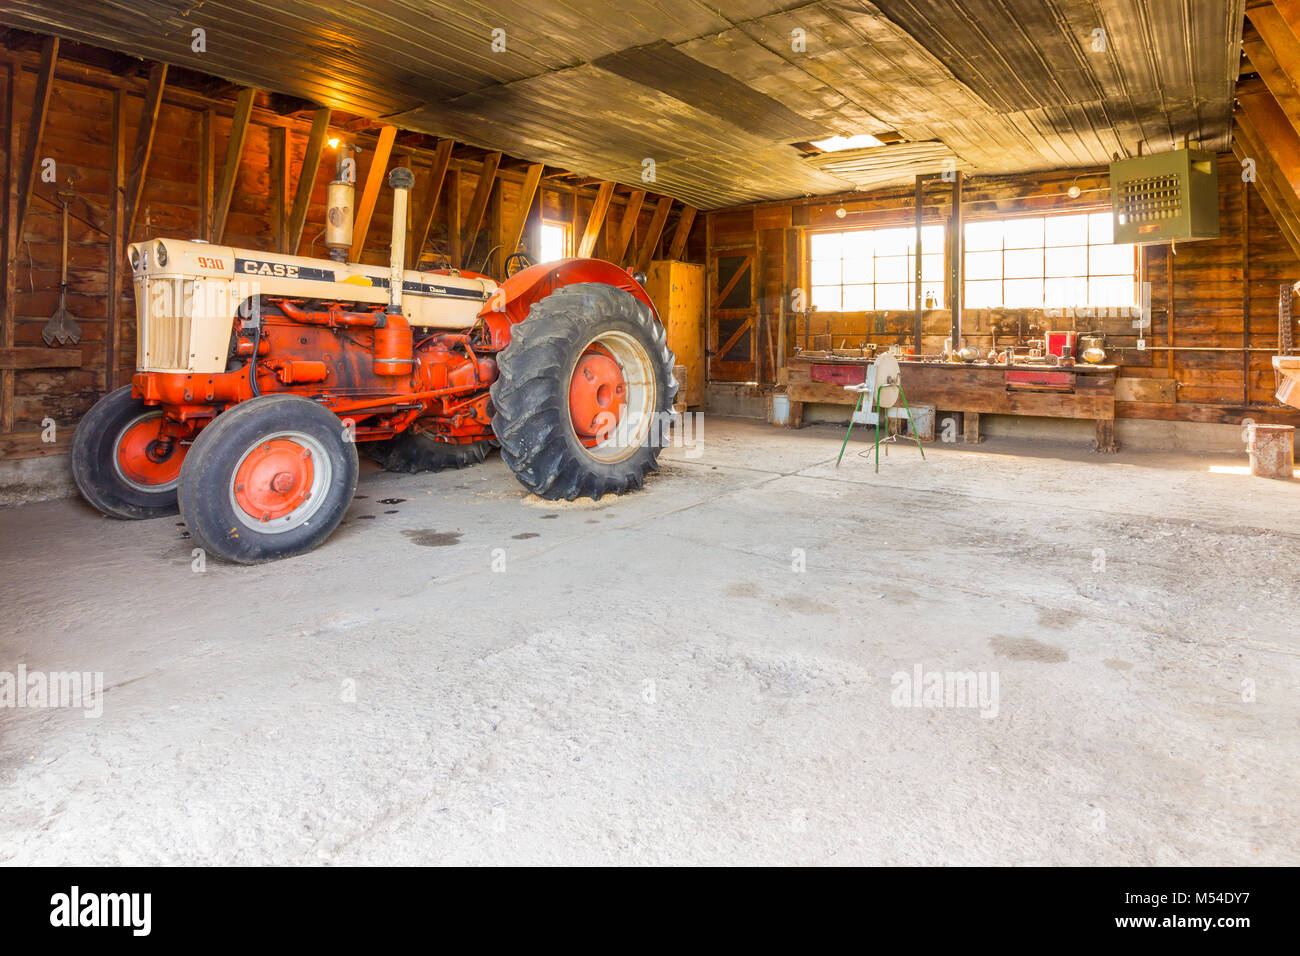 Bar u ranch national historical site ld mechanical tractor workshop Stock Photo